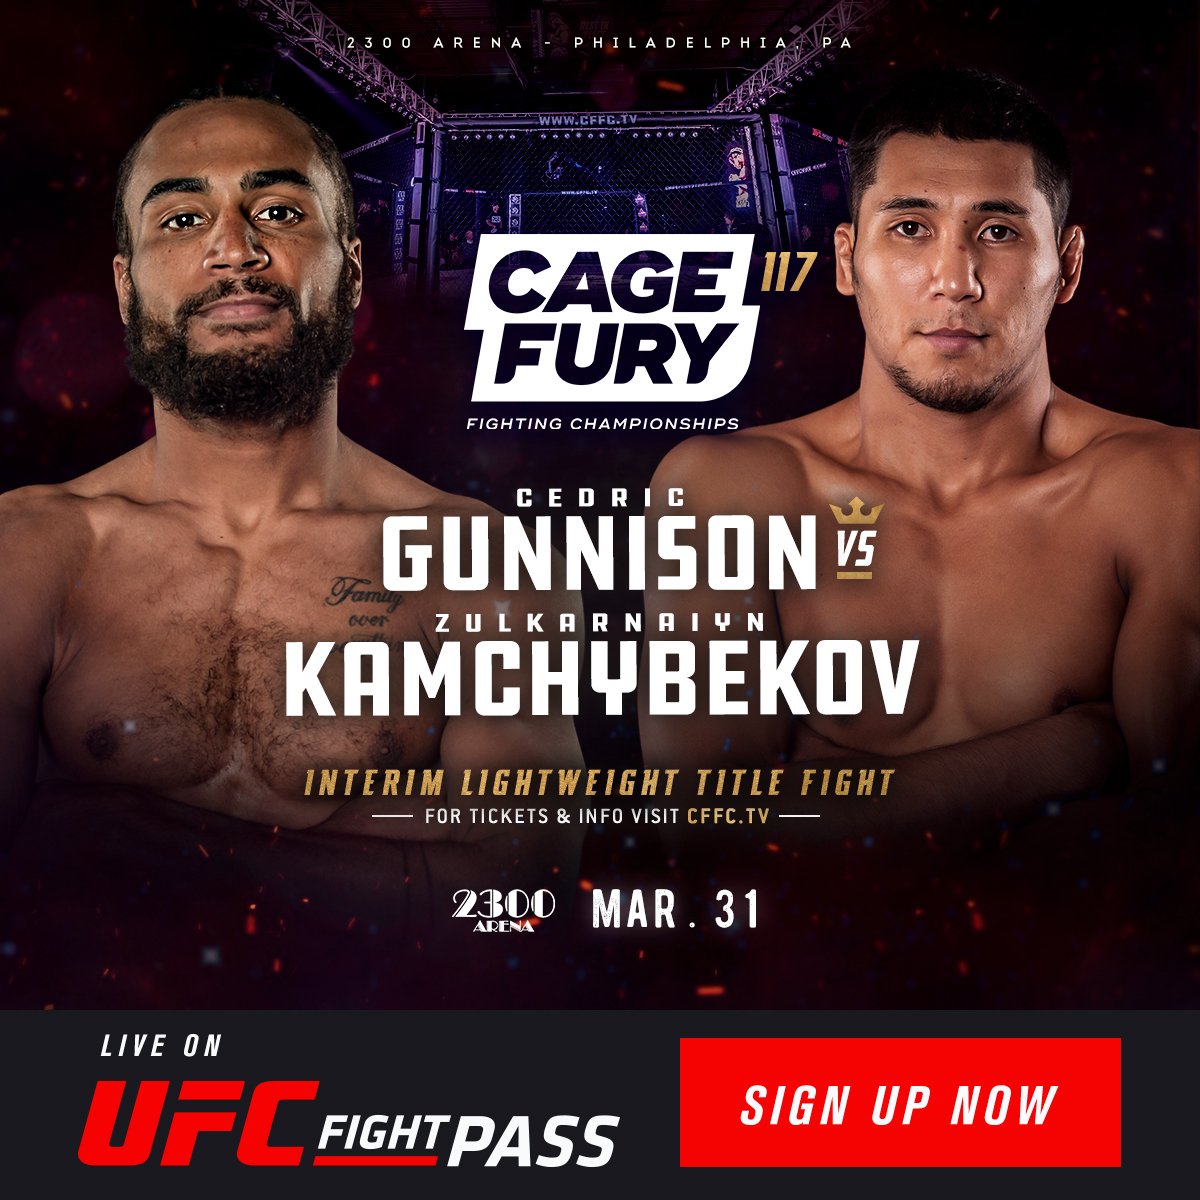 Cage Fury Fighting Championships kicks off 2023 campaign with blockbuster back-to-back weekend — Cage Fury Fighting Championships